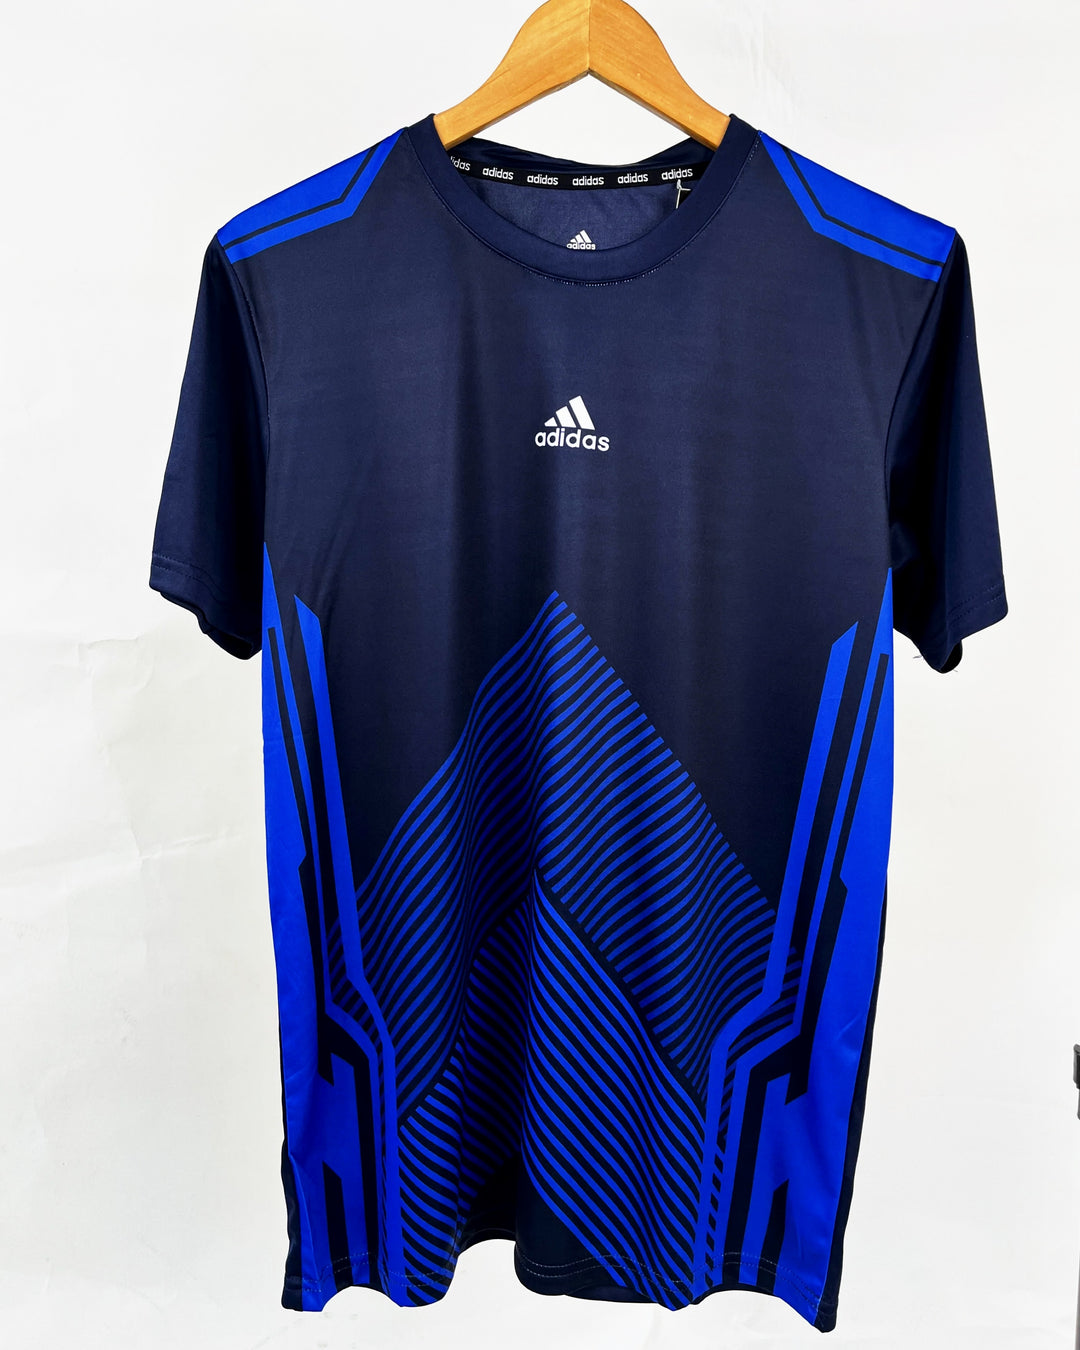 Adidas navy blue sports t-shirt with stripe